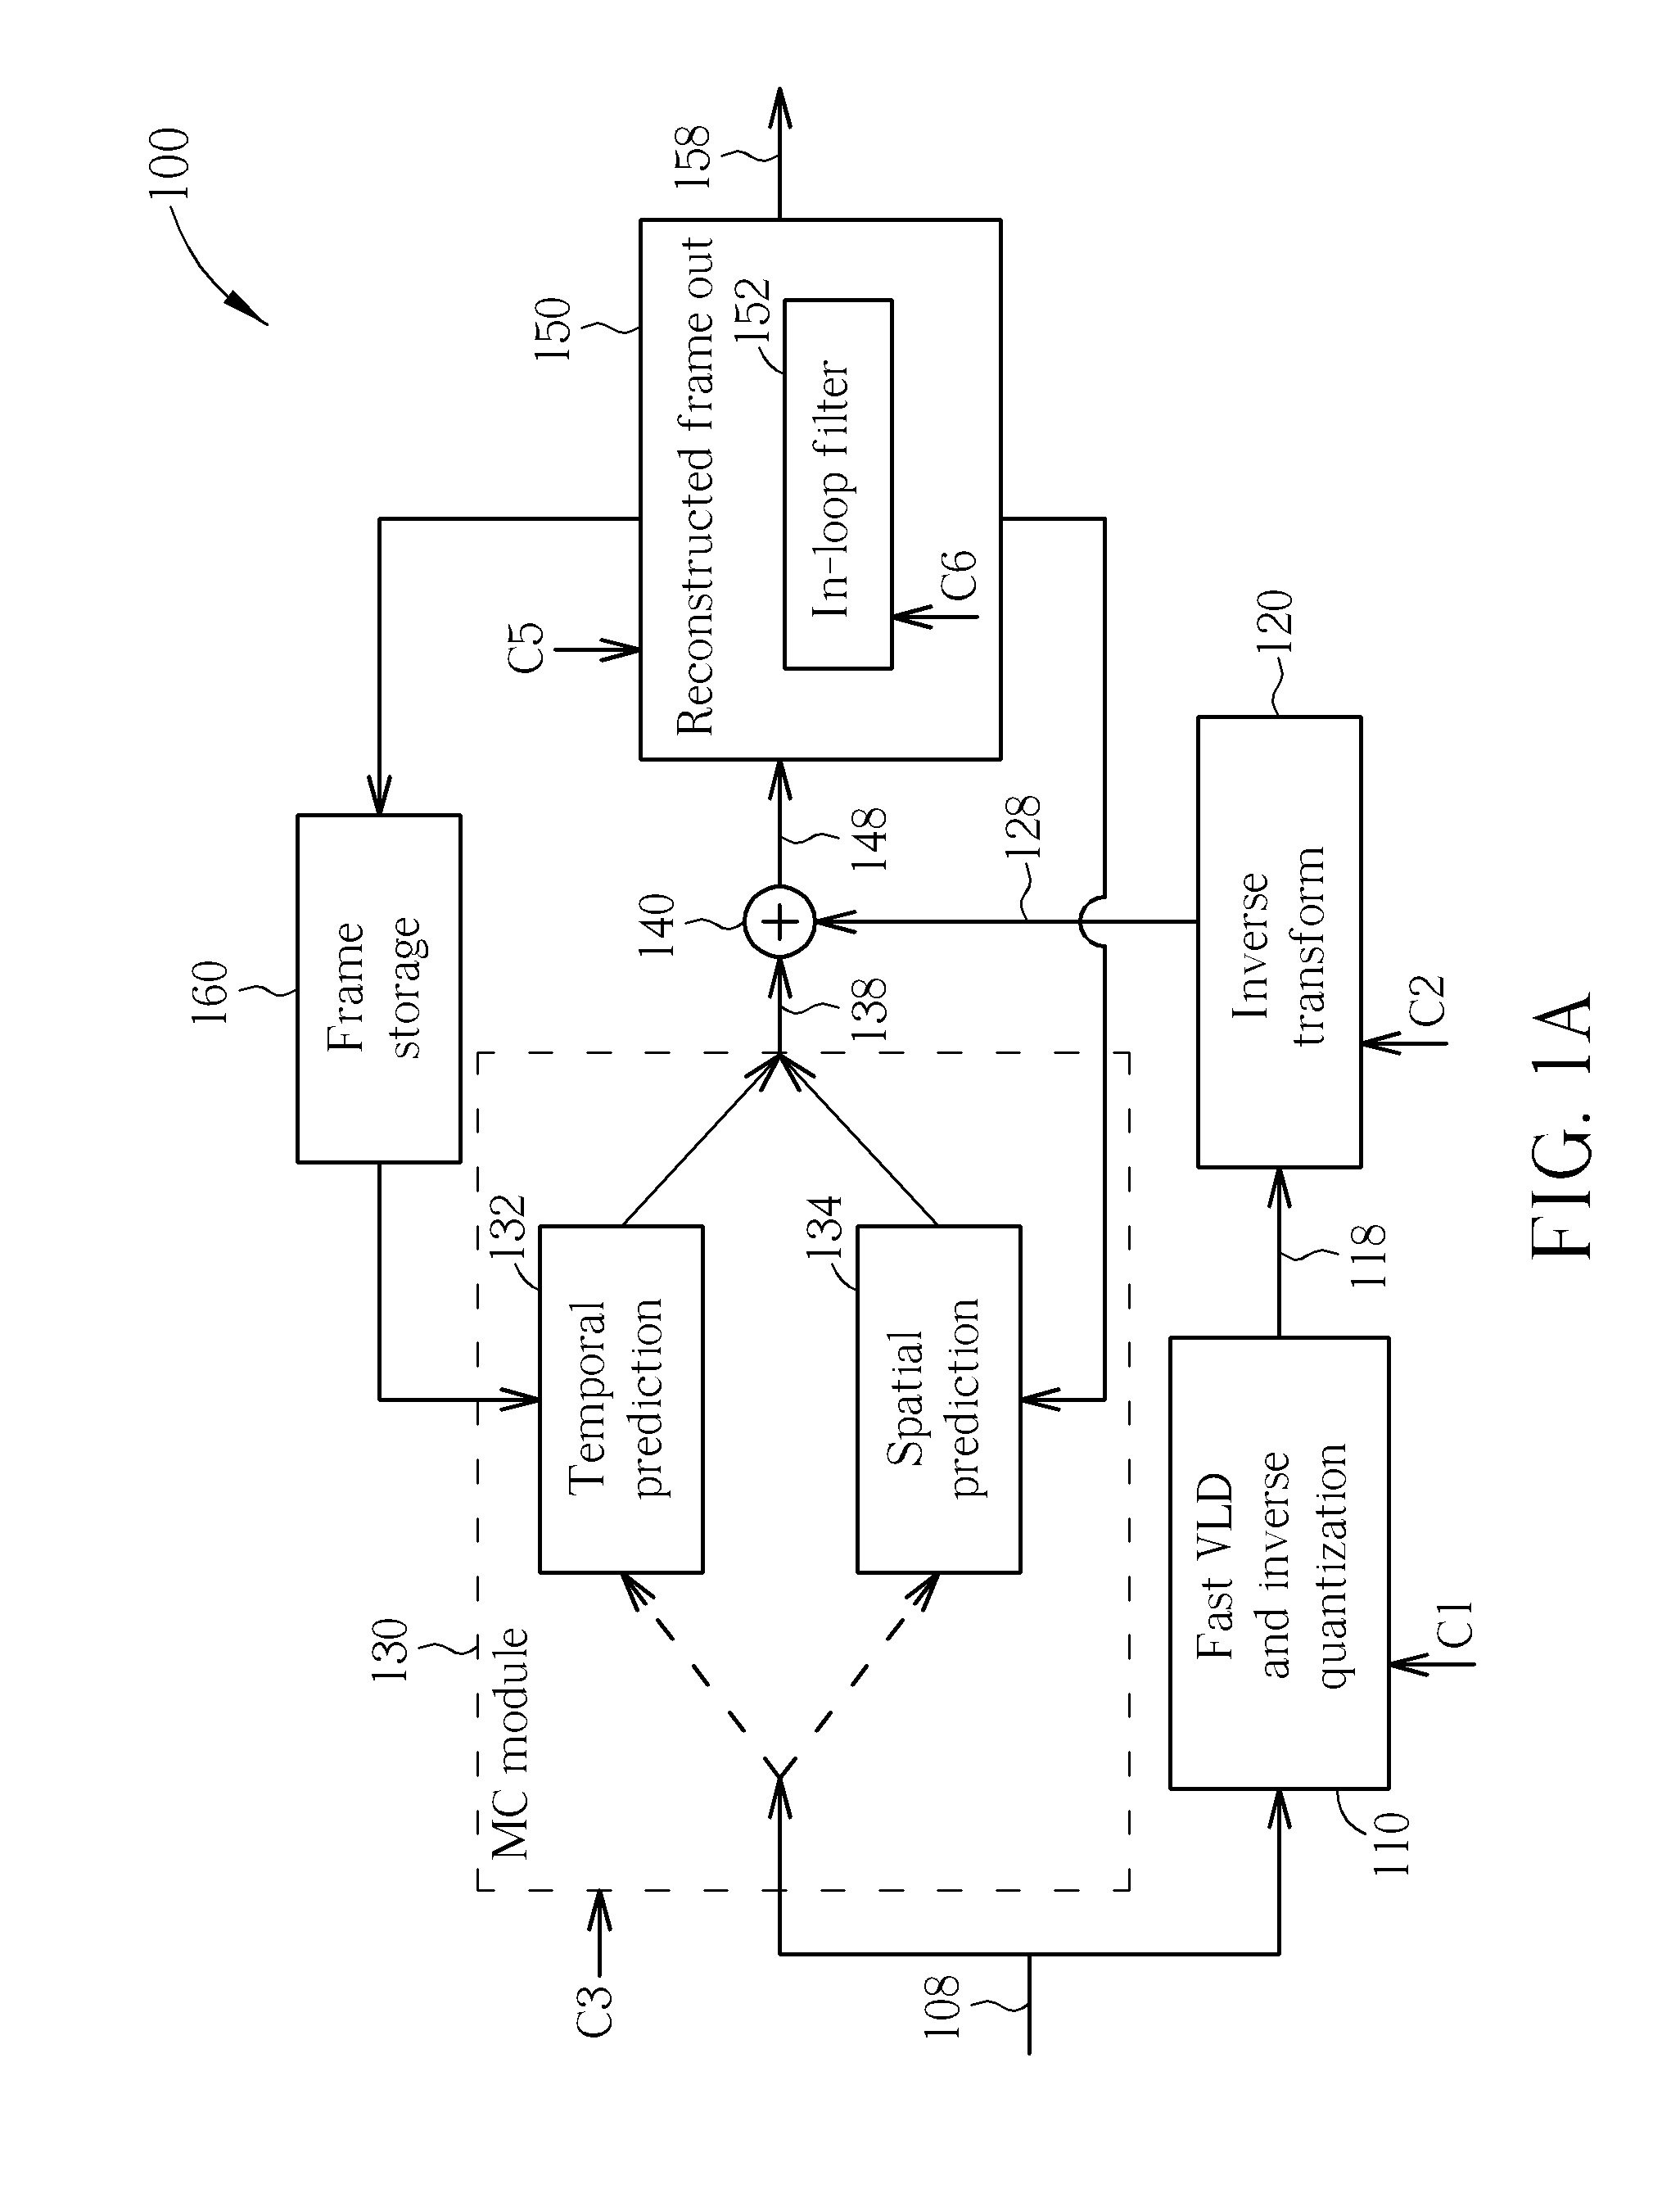 Method for adaptively performing video decoding, and associated adaptive complexity video decoder and adaptive audio/video playback system